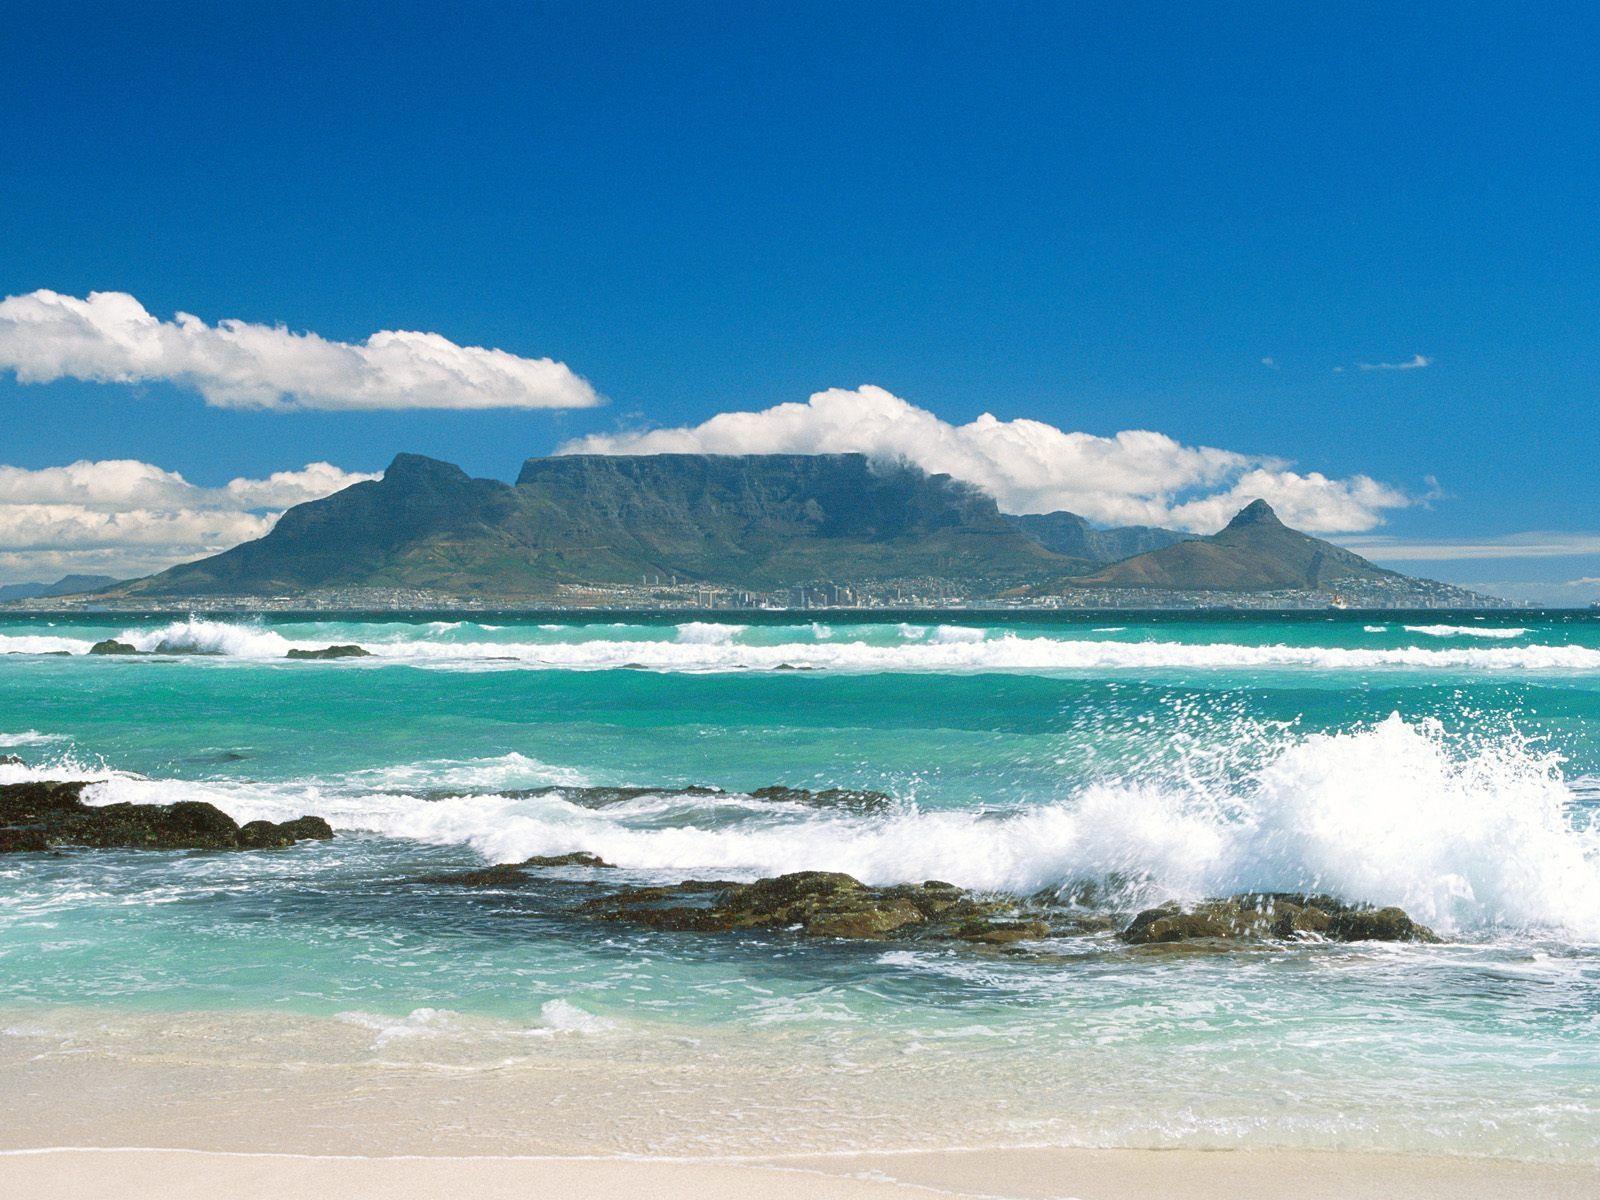 Coastline View of Table Mountain / South Africa wallpaper